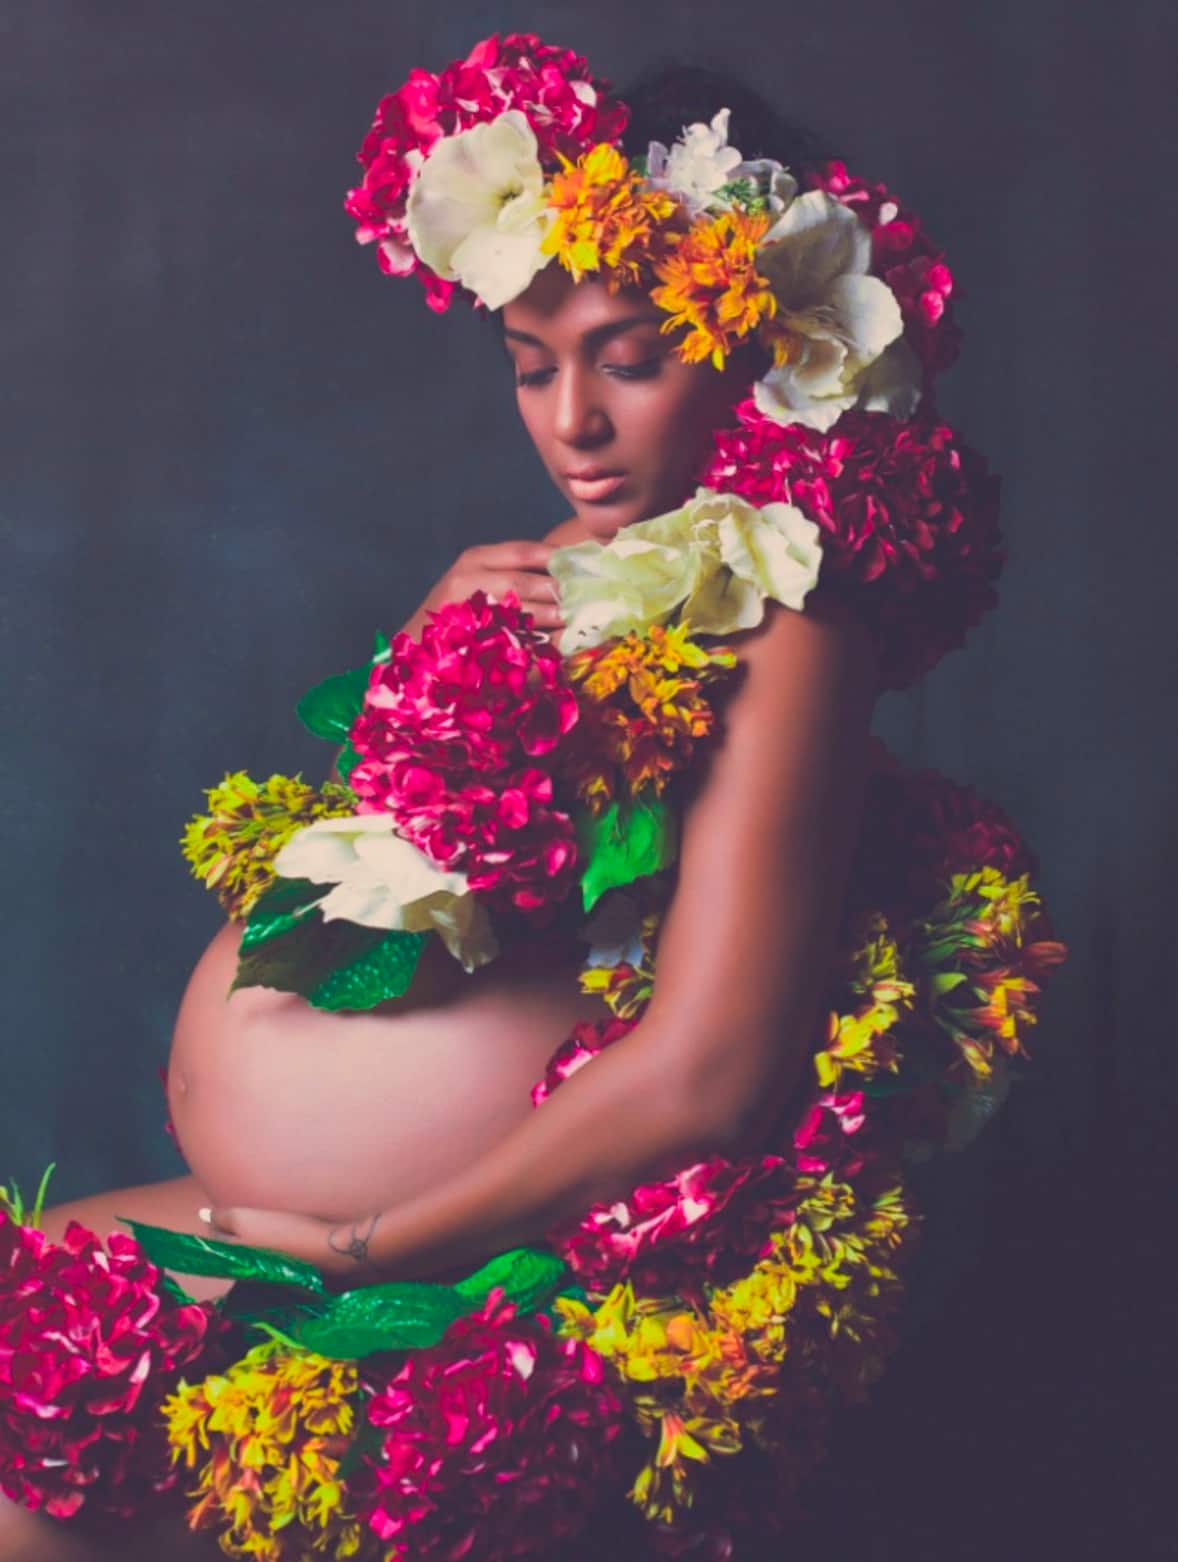 Shweta's pregnancy photoshoot is bold and inspiring